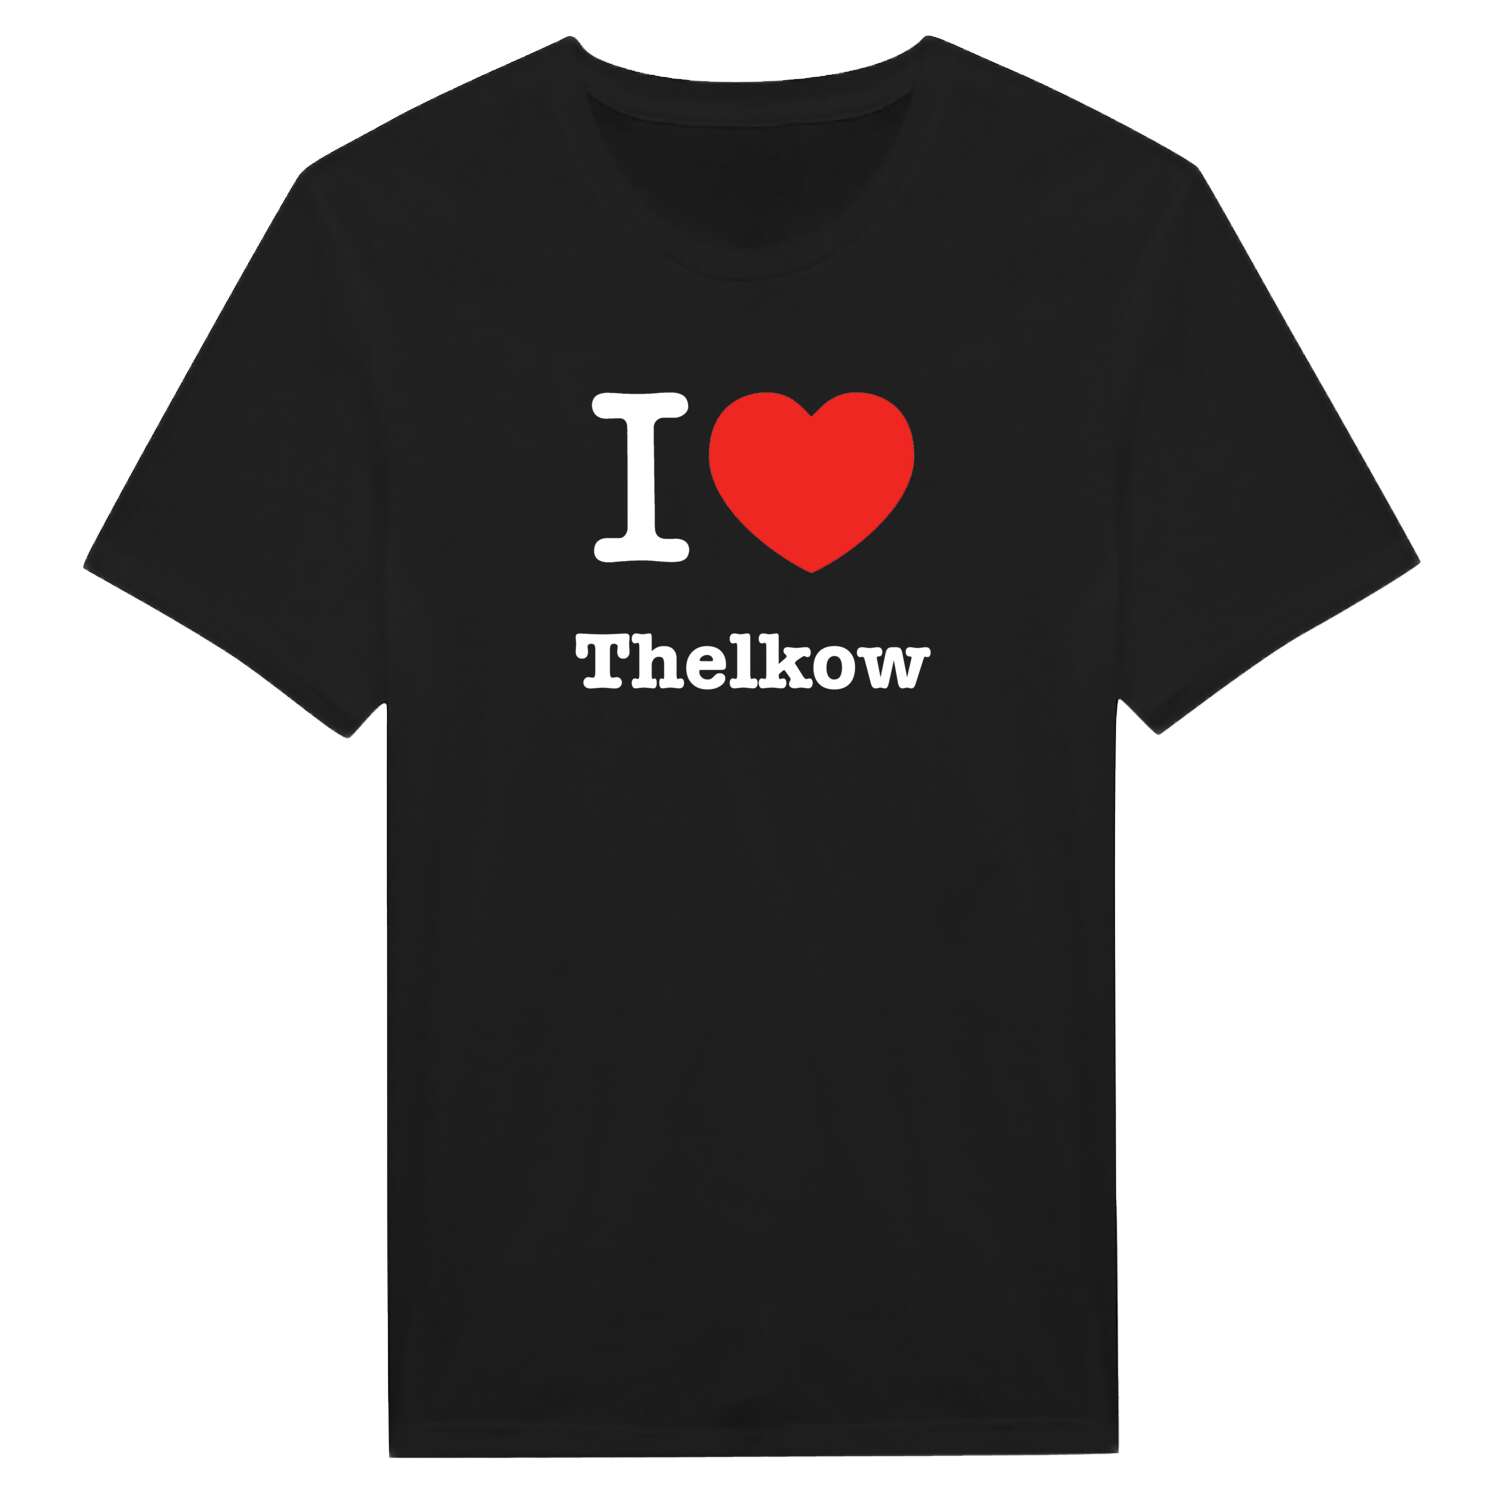 Thelkow T-Shirt »I love«